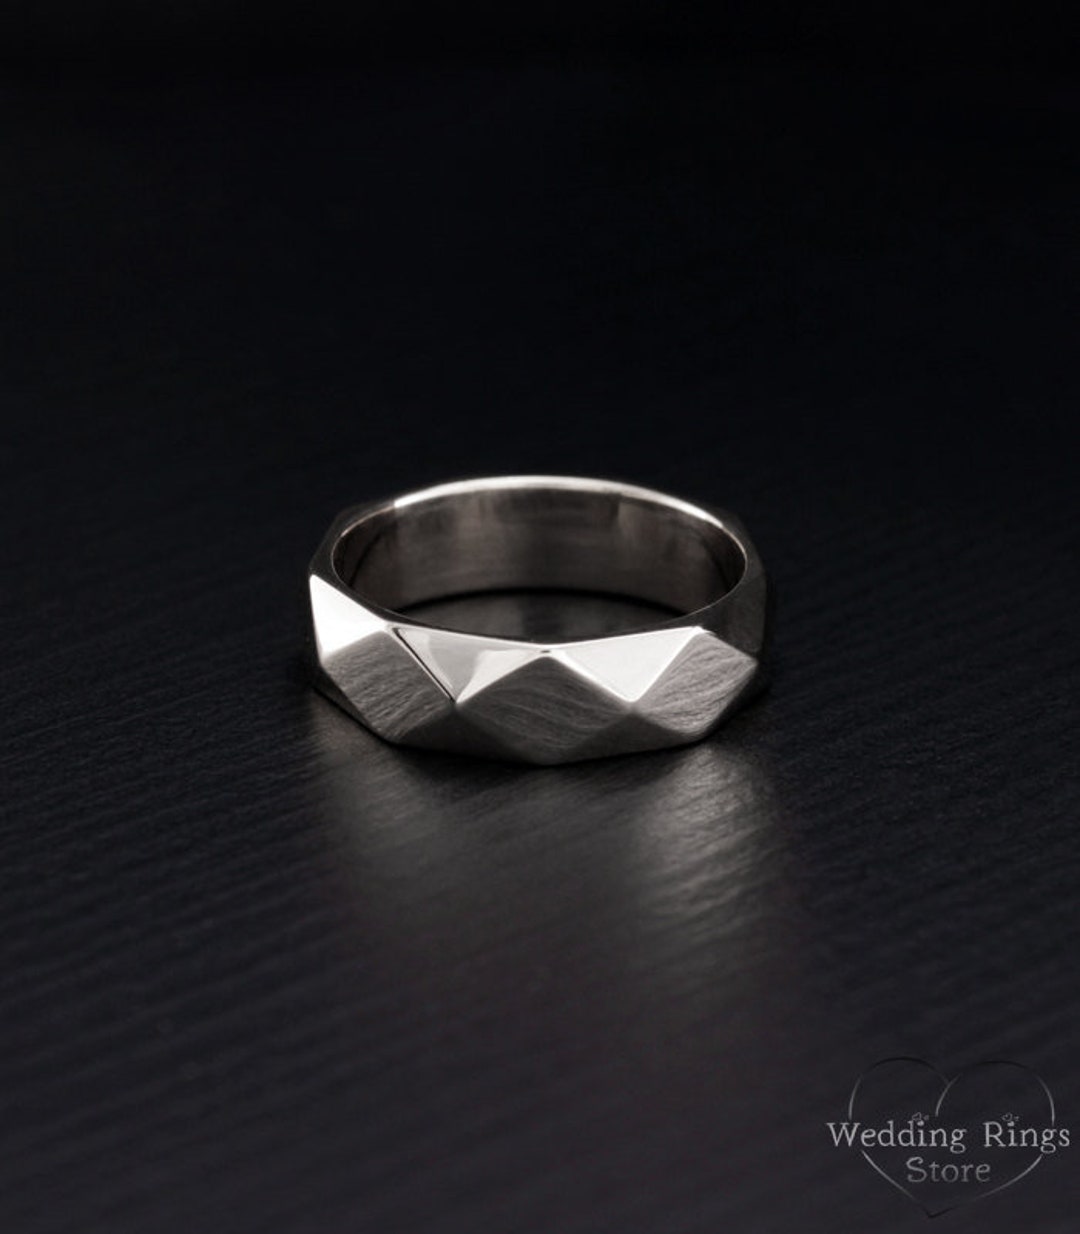 Exclusive Unisex Wedding Band in Sterling Silver With Unique Faceted ...